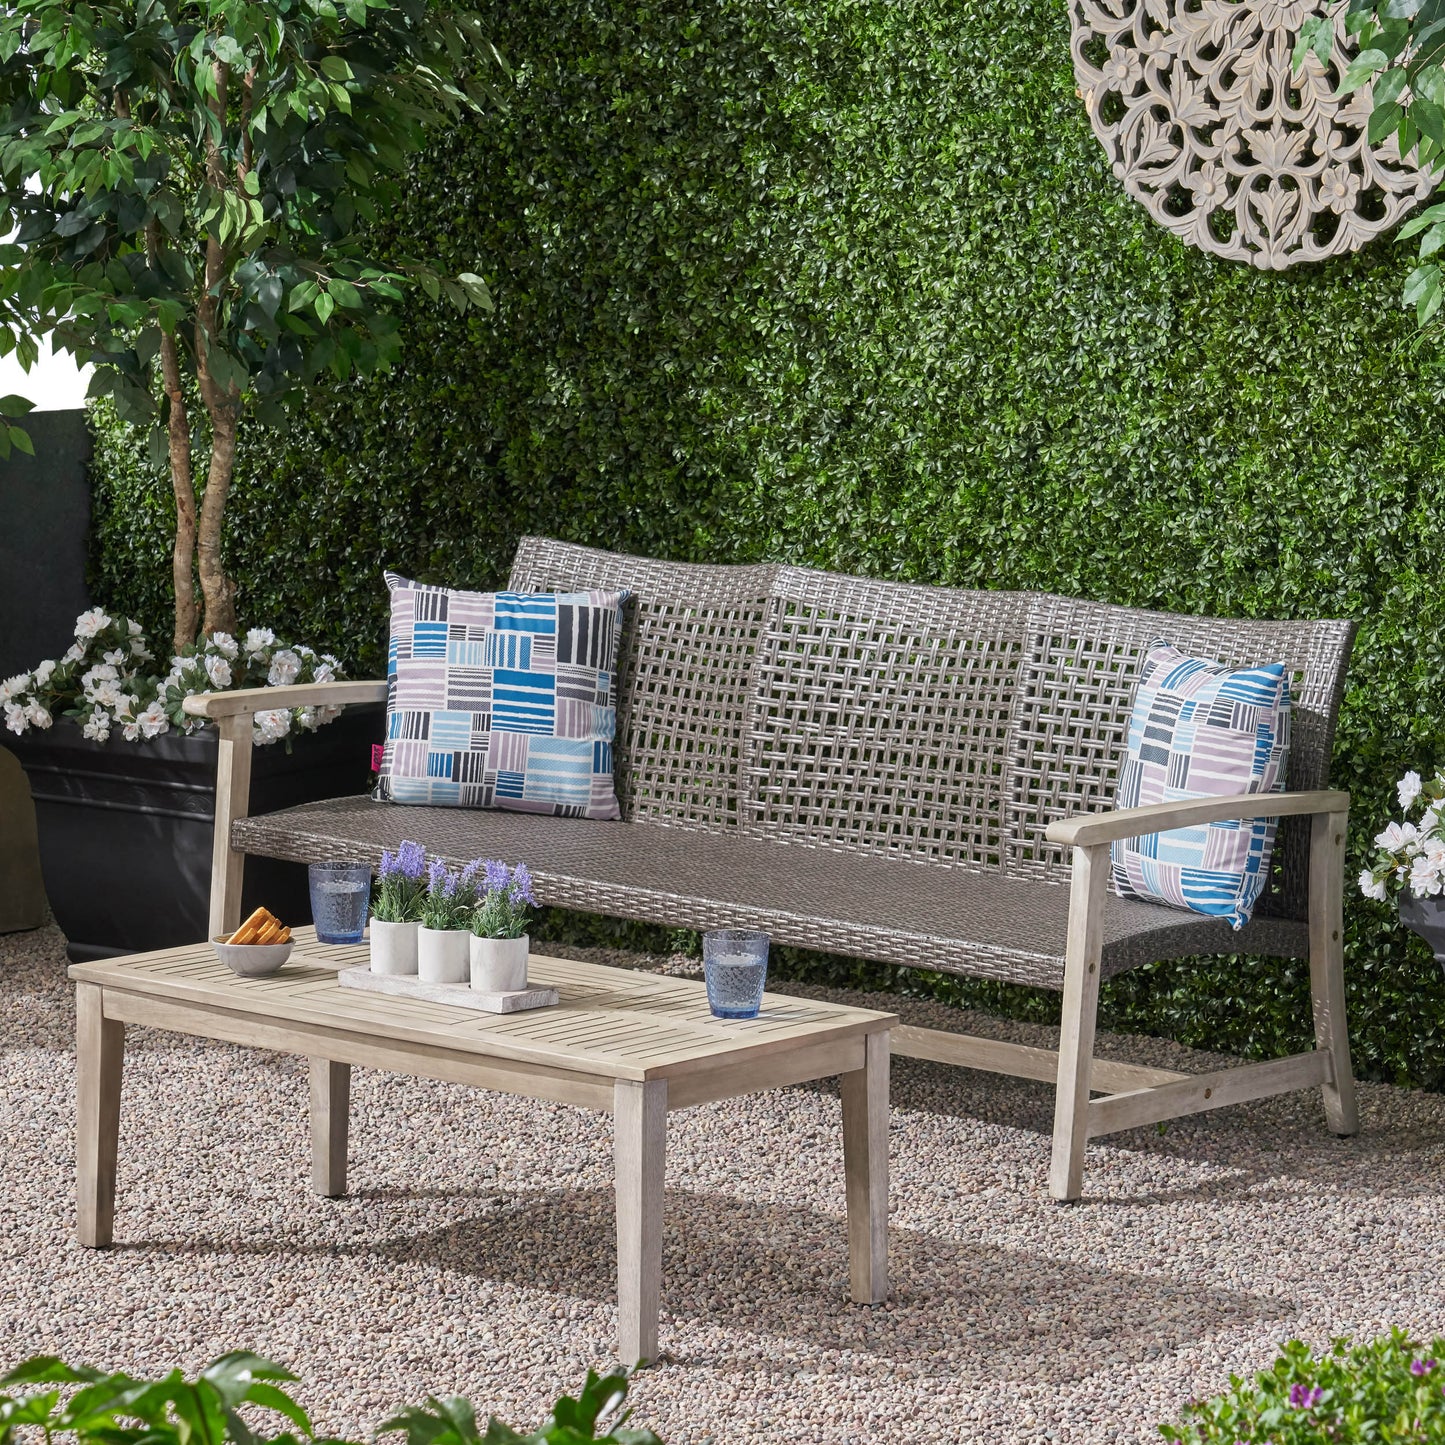 Beacher Belloc Outdoor Wood and Wicker Sofa and Coffee Table Set